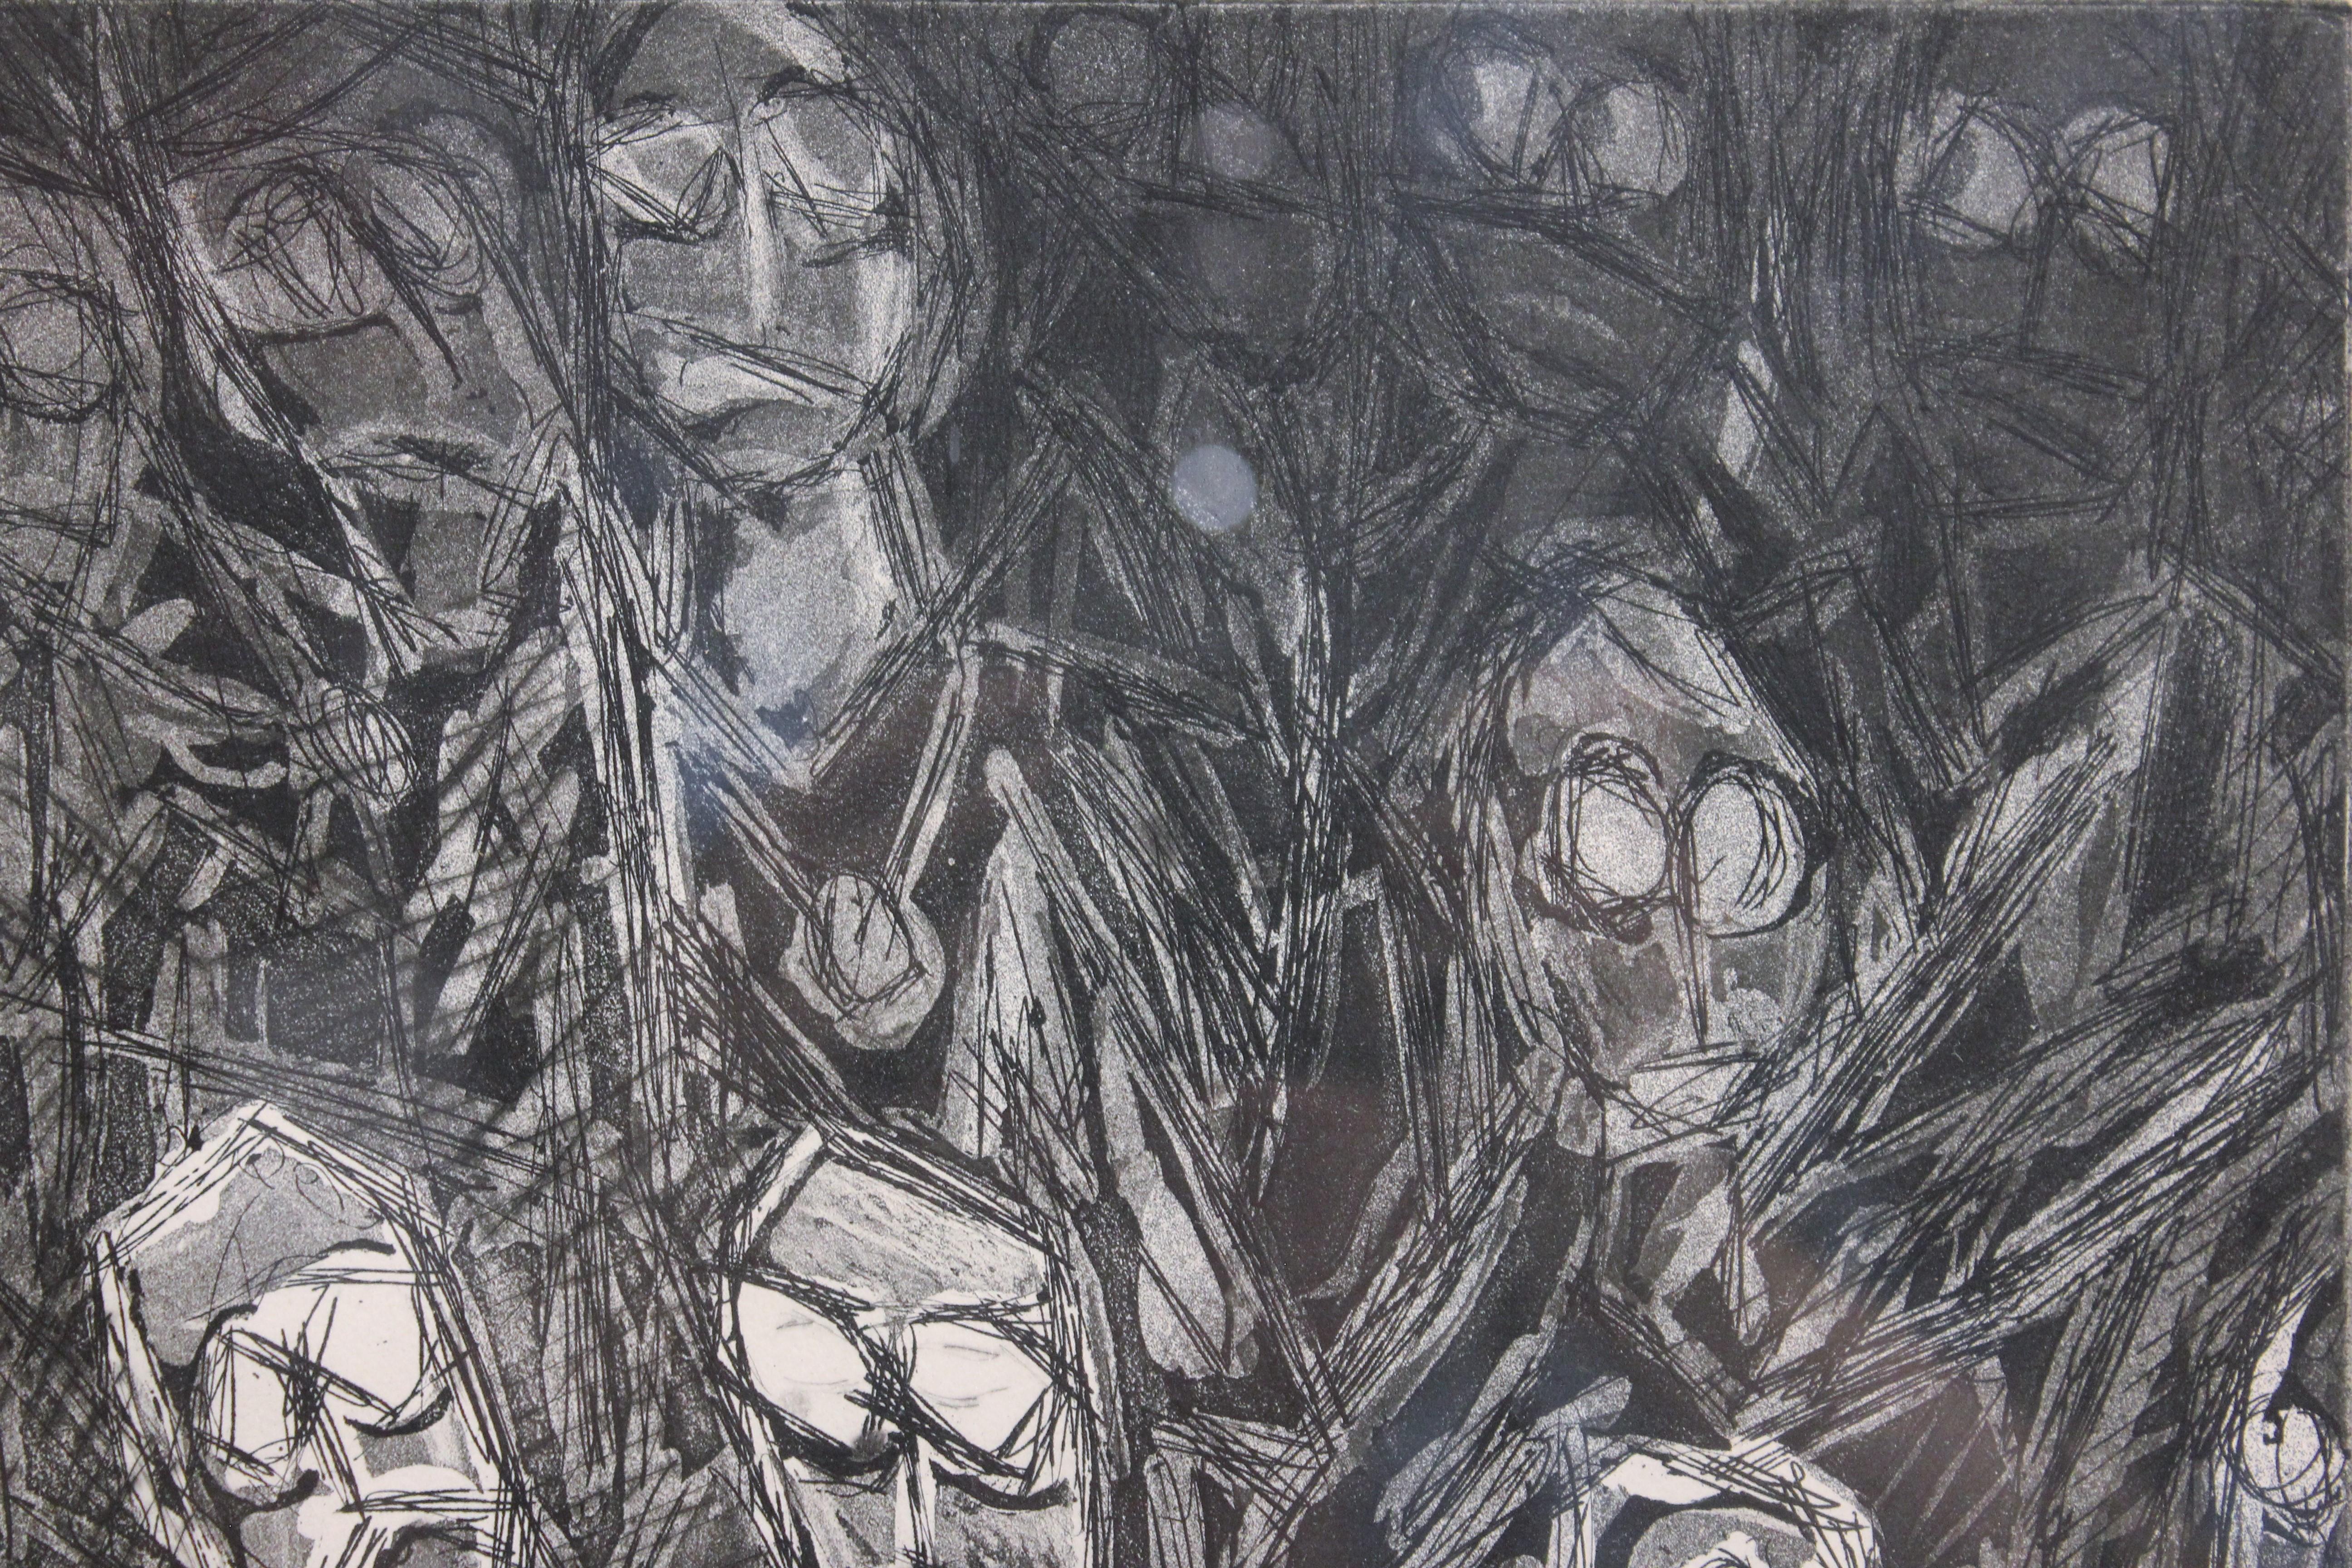 Surrealist Crowed of Figures in Black and White Edition 4 of 4 - Print by Richard E. Fluhr